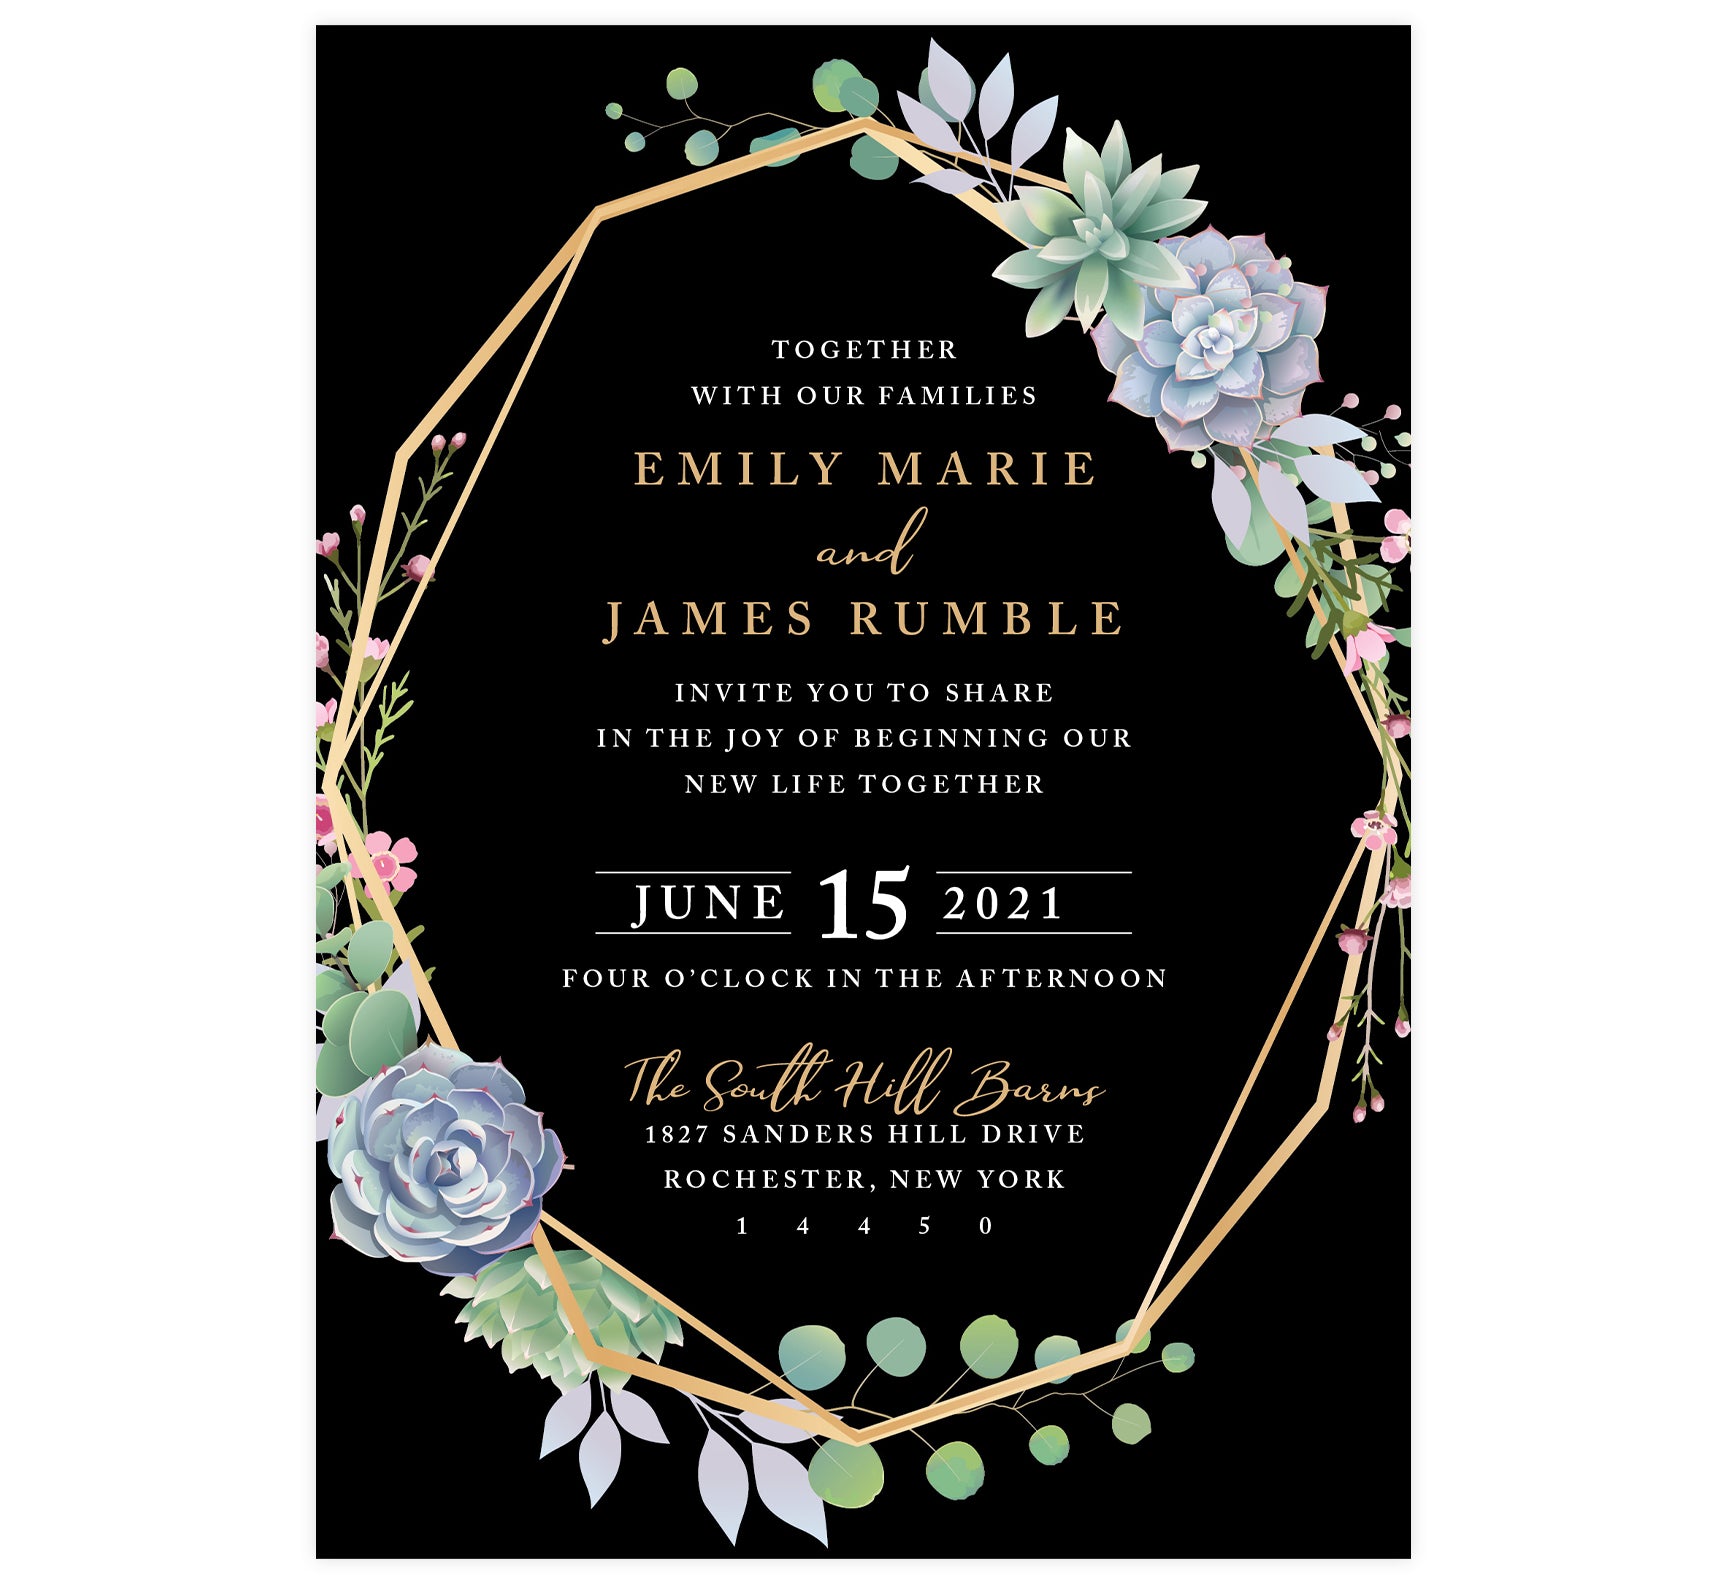 Succulent Frame Wedding Invitation; black background with gold frame, succulent son the top right and bottom left edges of the frame. White and gold text for the information